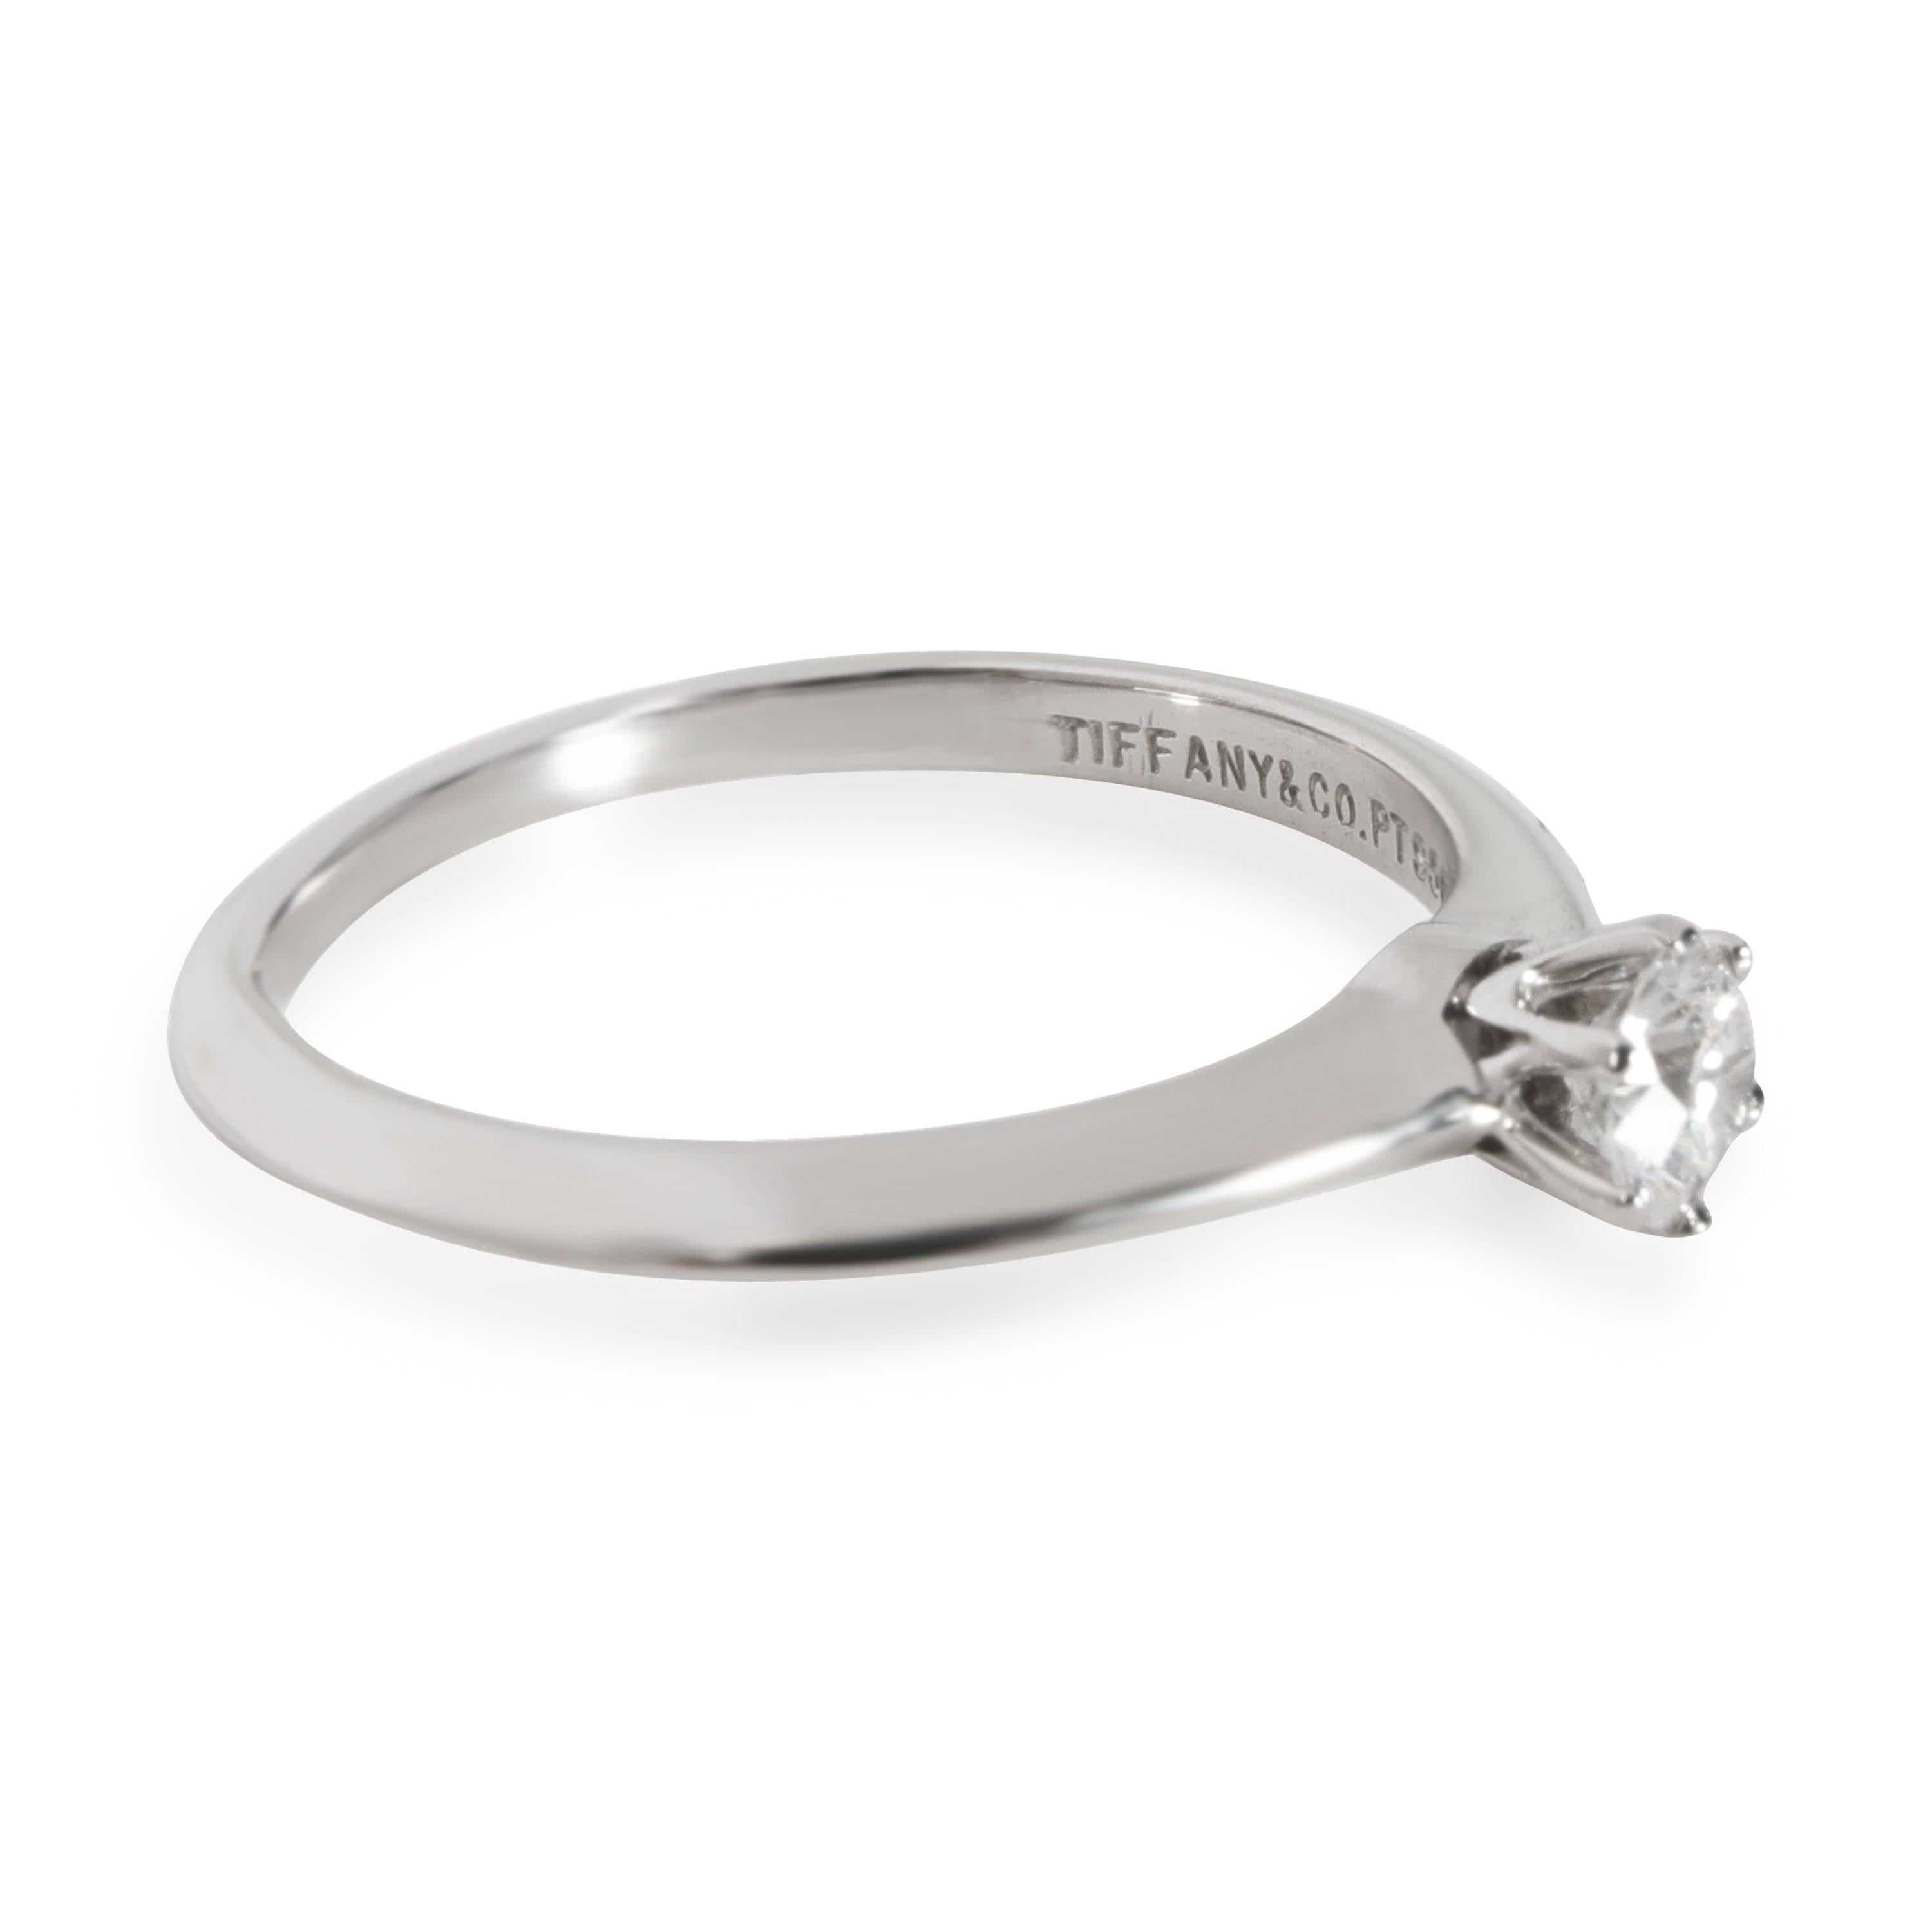 Tiffany & Co. Solitaire Diamond Engagement Ring in Platinum G VS1 0.22 CTW In Excellent Condition For Sale In New York, NY